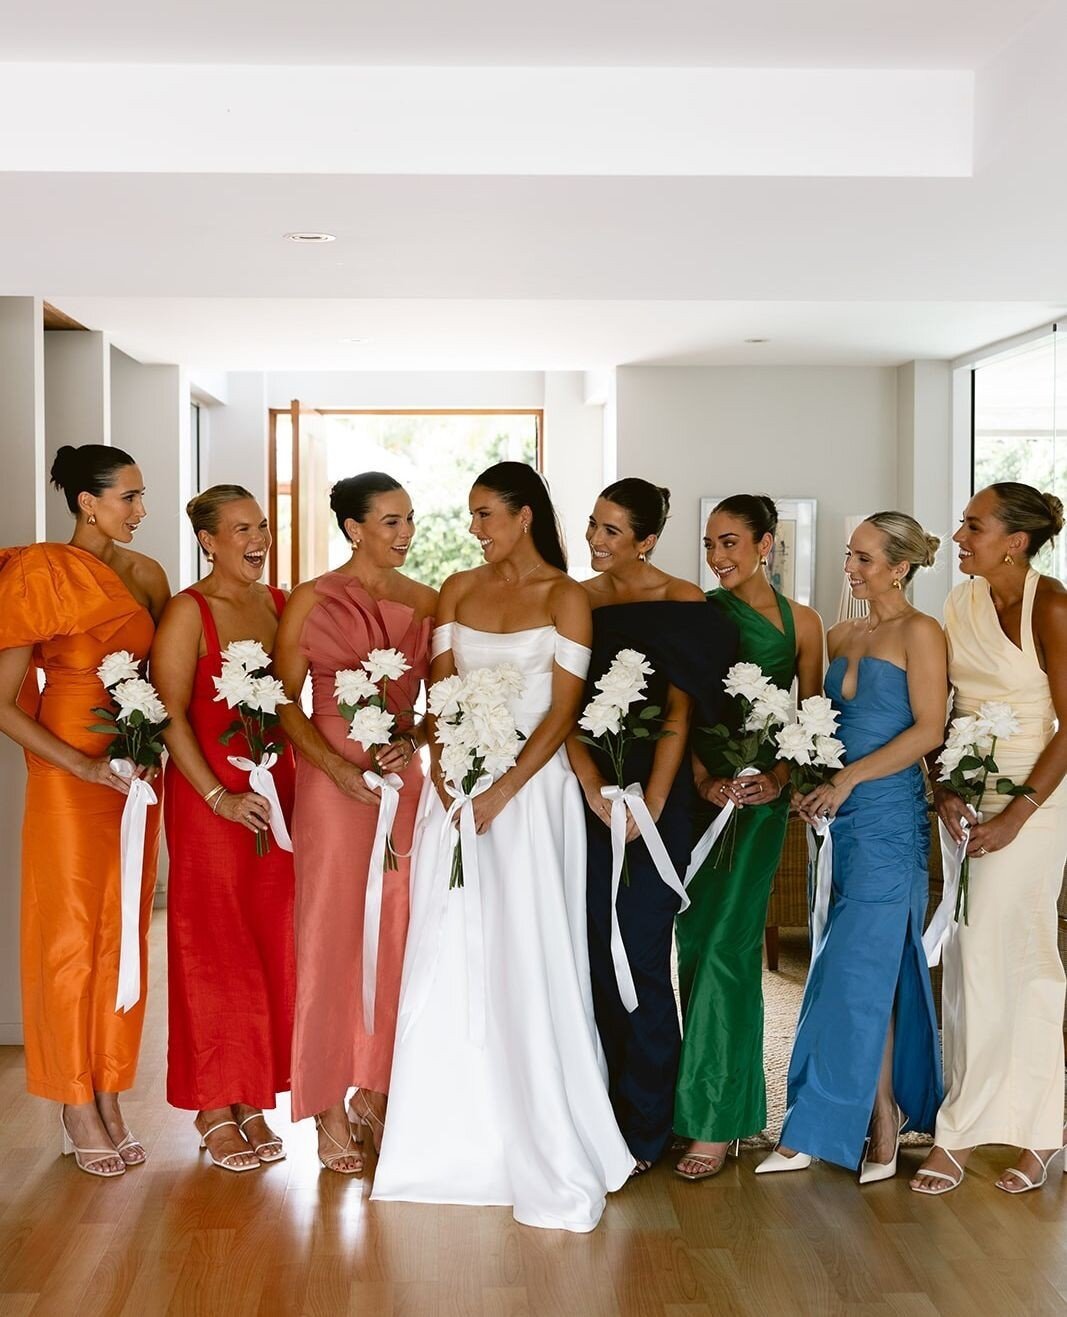 We LOVE seeing bridesmaids in different dresses and colours to suit their personal style ✨⁠
⁠
Photographer: @luminousmoments_⁠
Florist: @mapleflowersdecor⁠
Planner &amp; Stylist: @lovebirdweddings ⁠
Hair: @foxslanestyling ⁠
Makeup: @melissachristiema